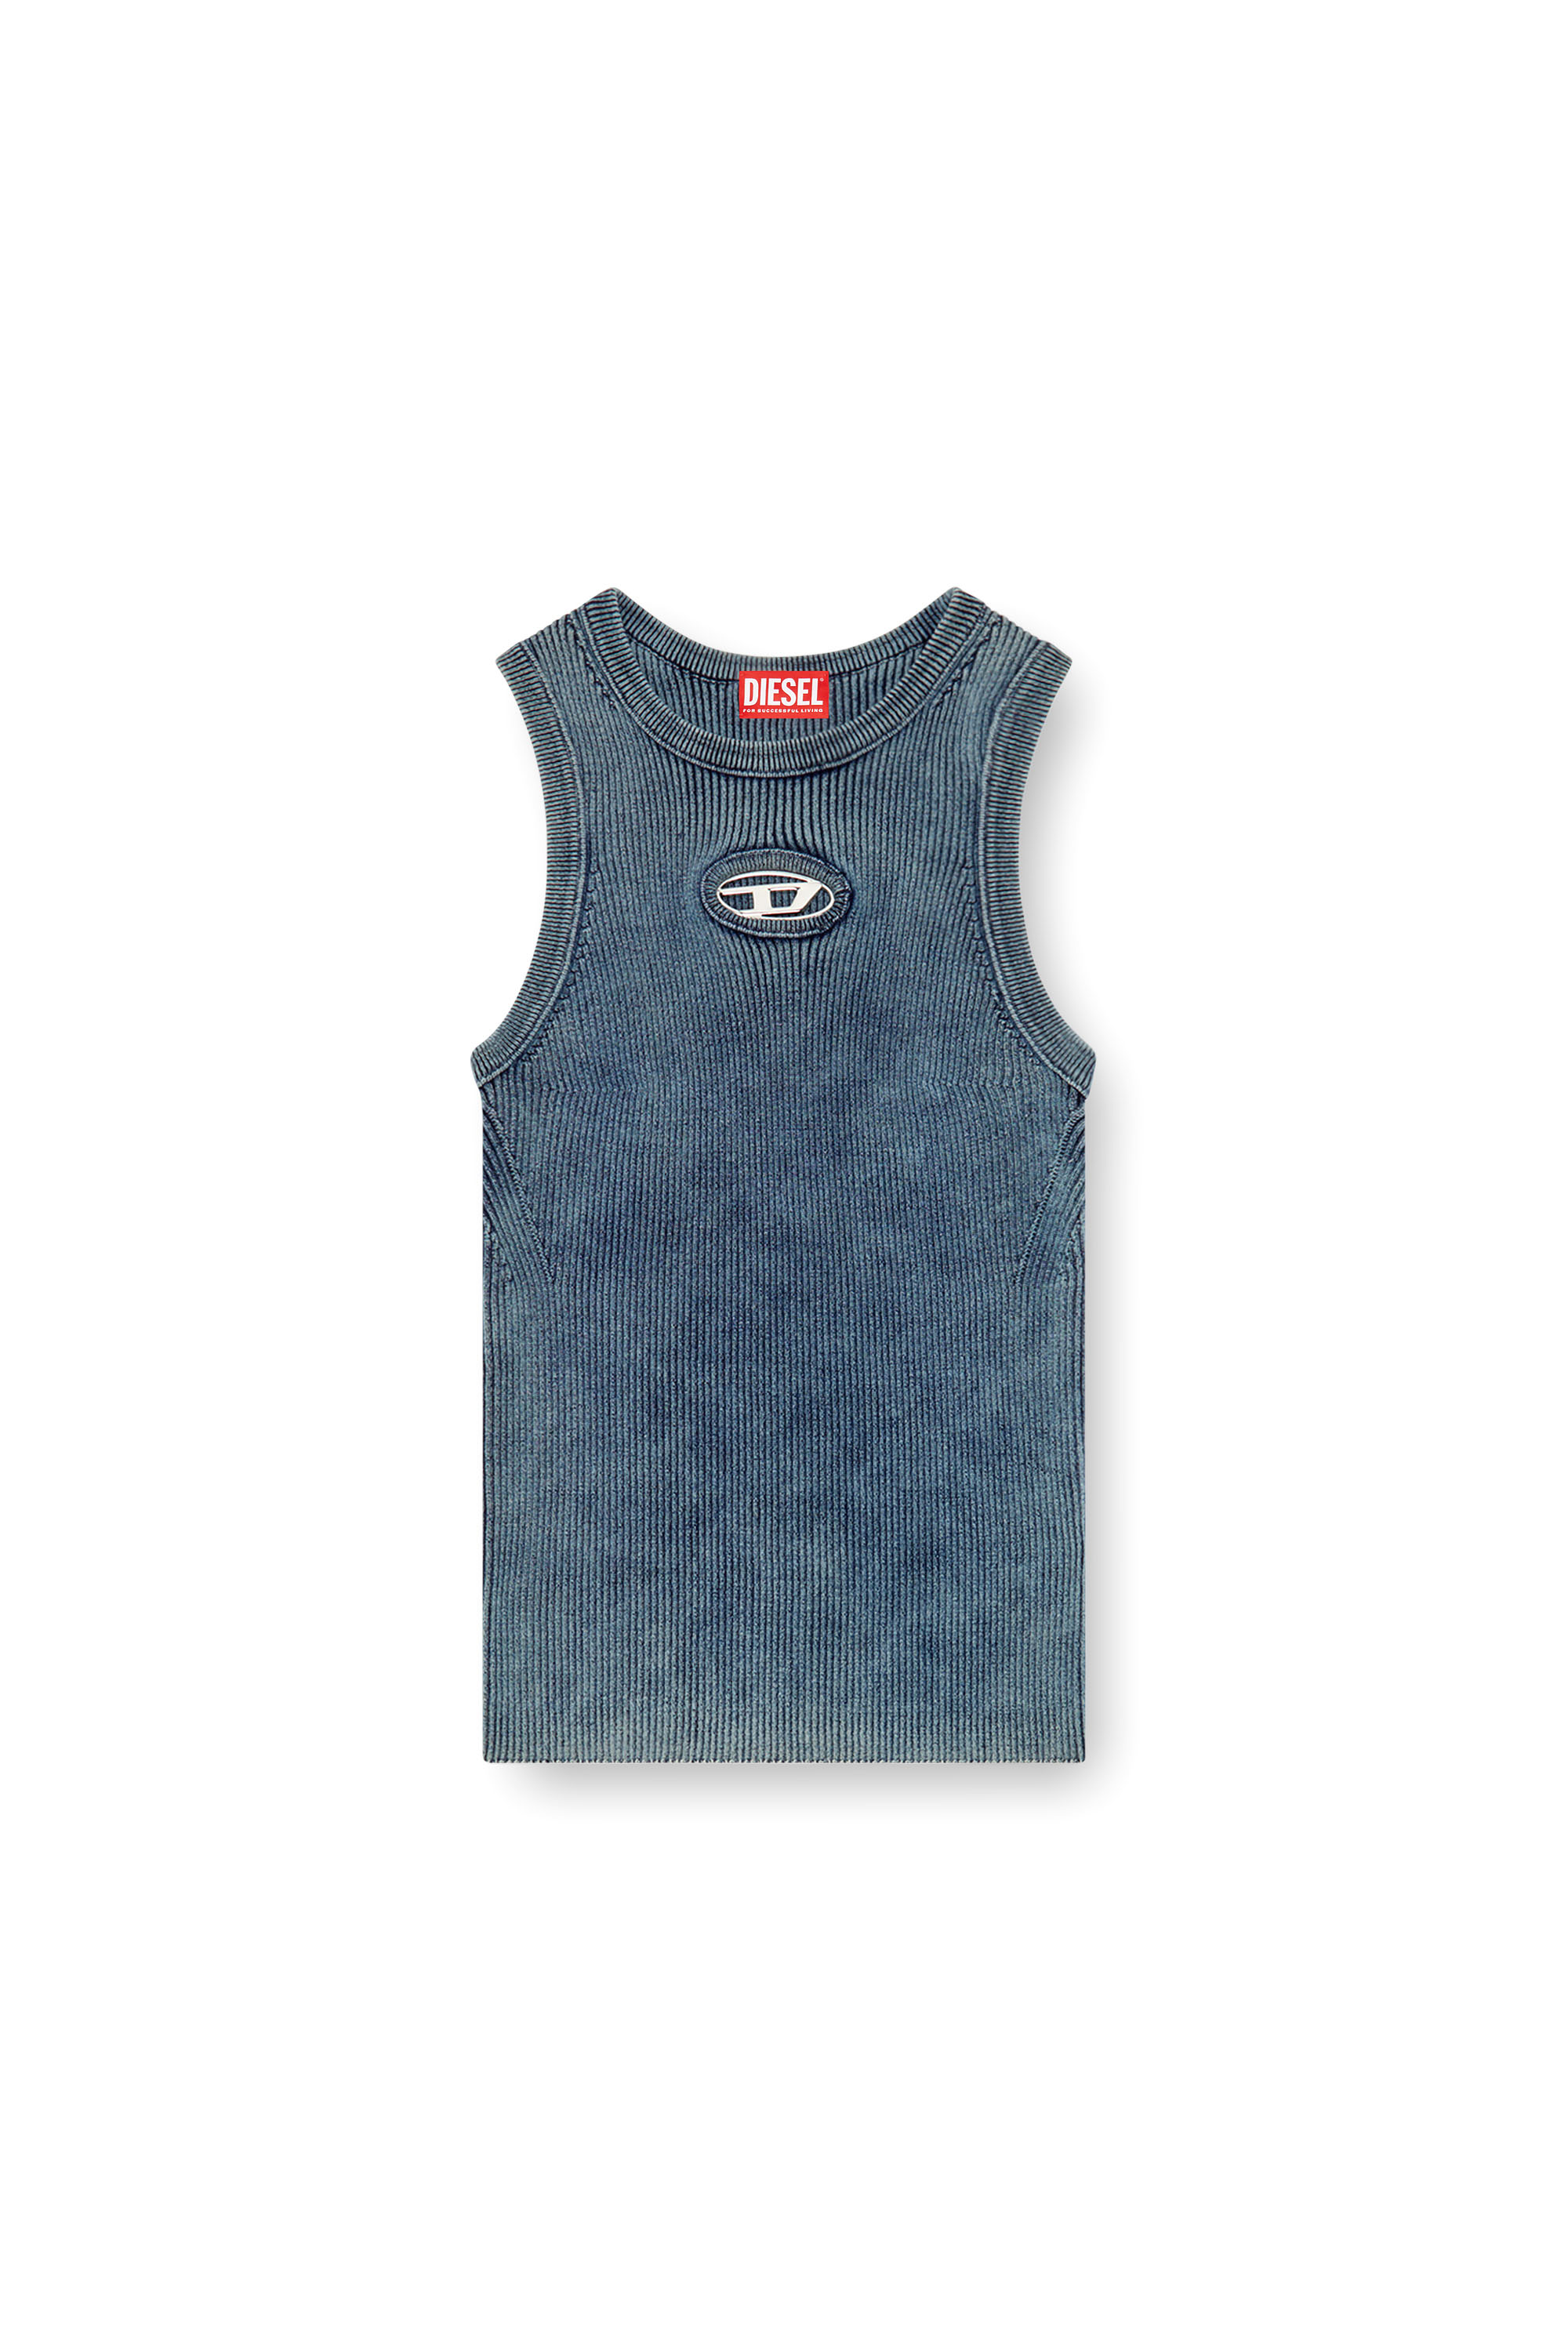 Diesel - M-ANCHOR-A-SL, Female Rib-knit tank top with Oval D in ブルー - Image 3